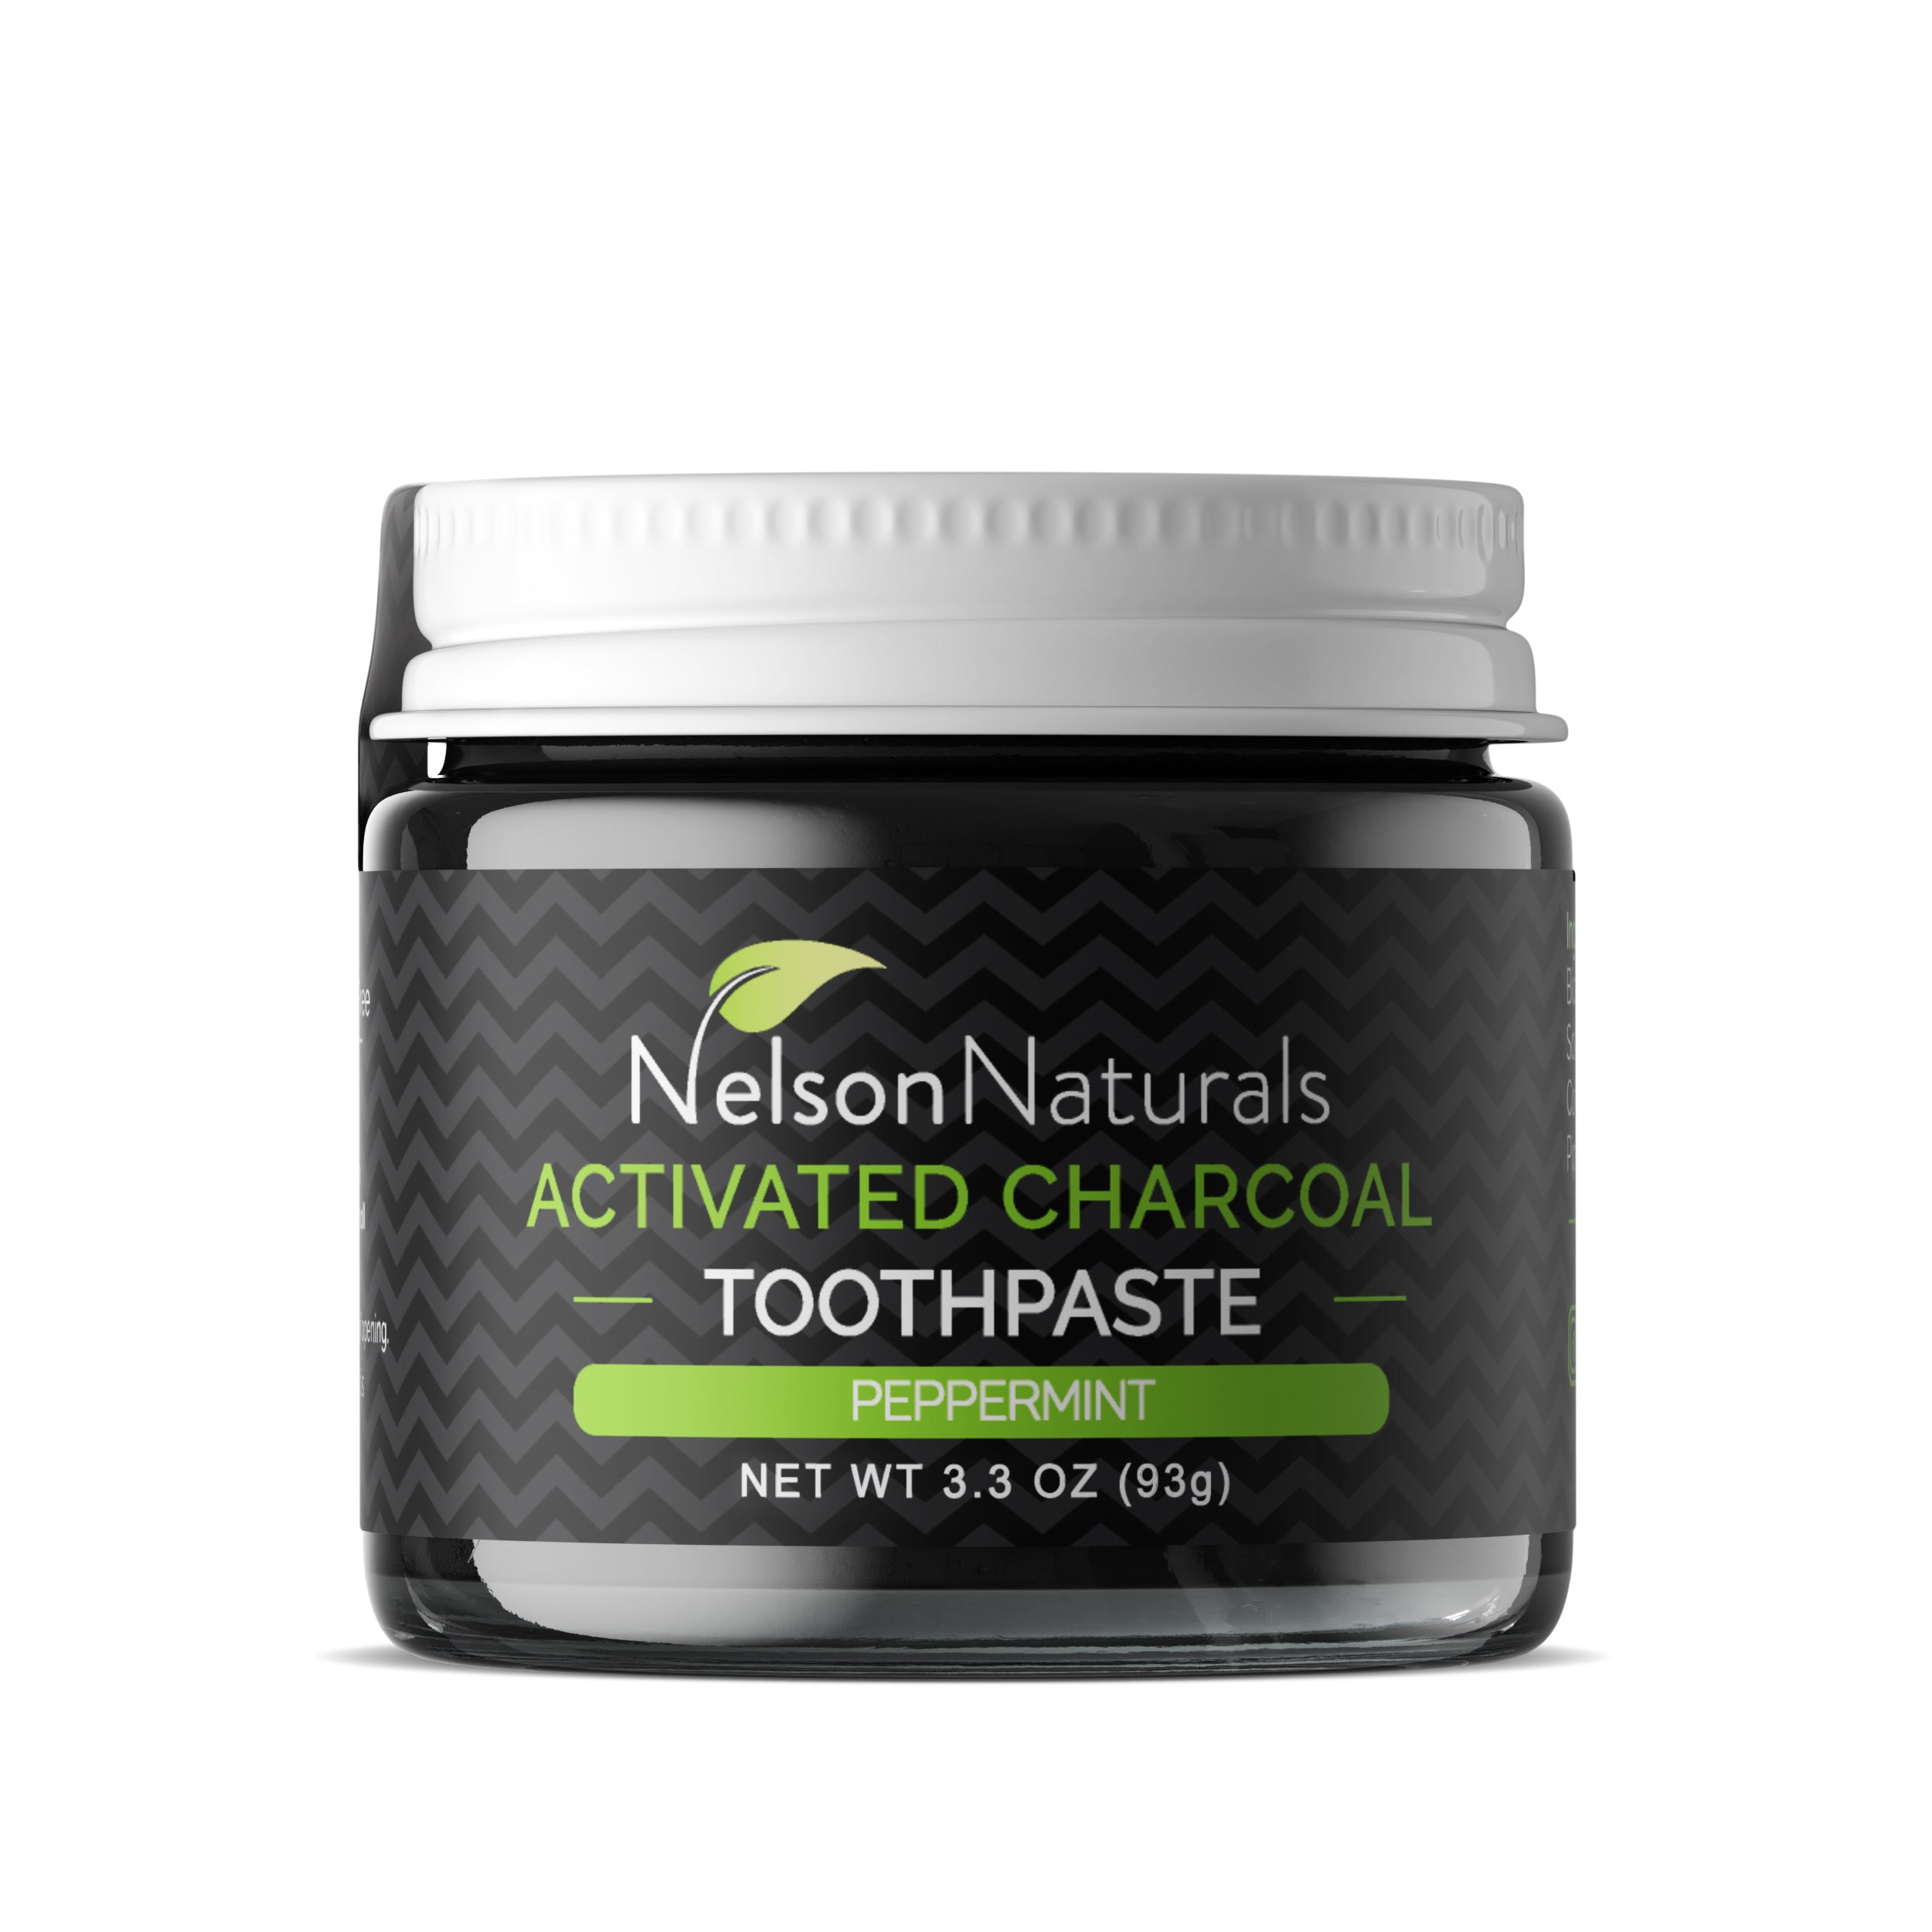 Activated Charcoal Whitening Toothpaste 93g Toothpaste - nelsonnaturals remineralizing toothpaste